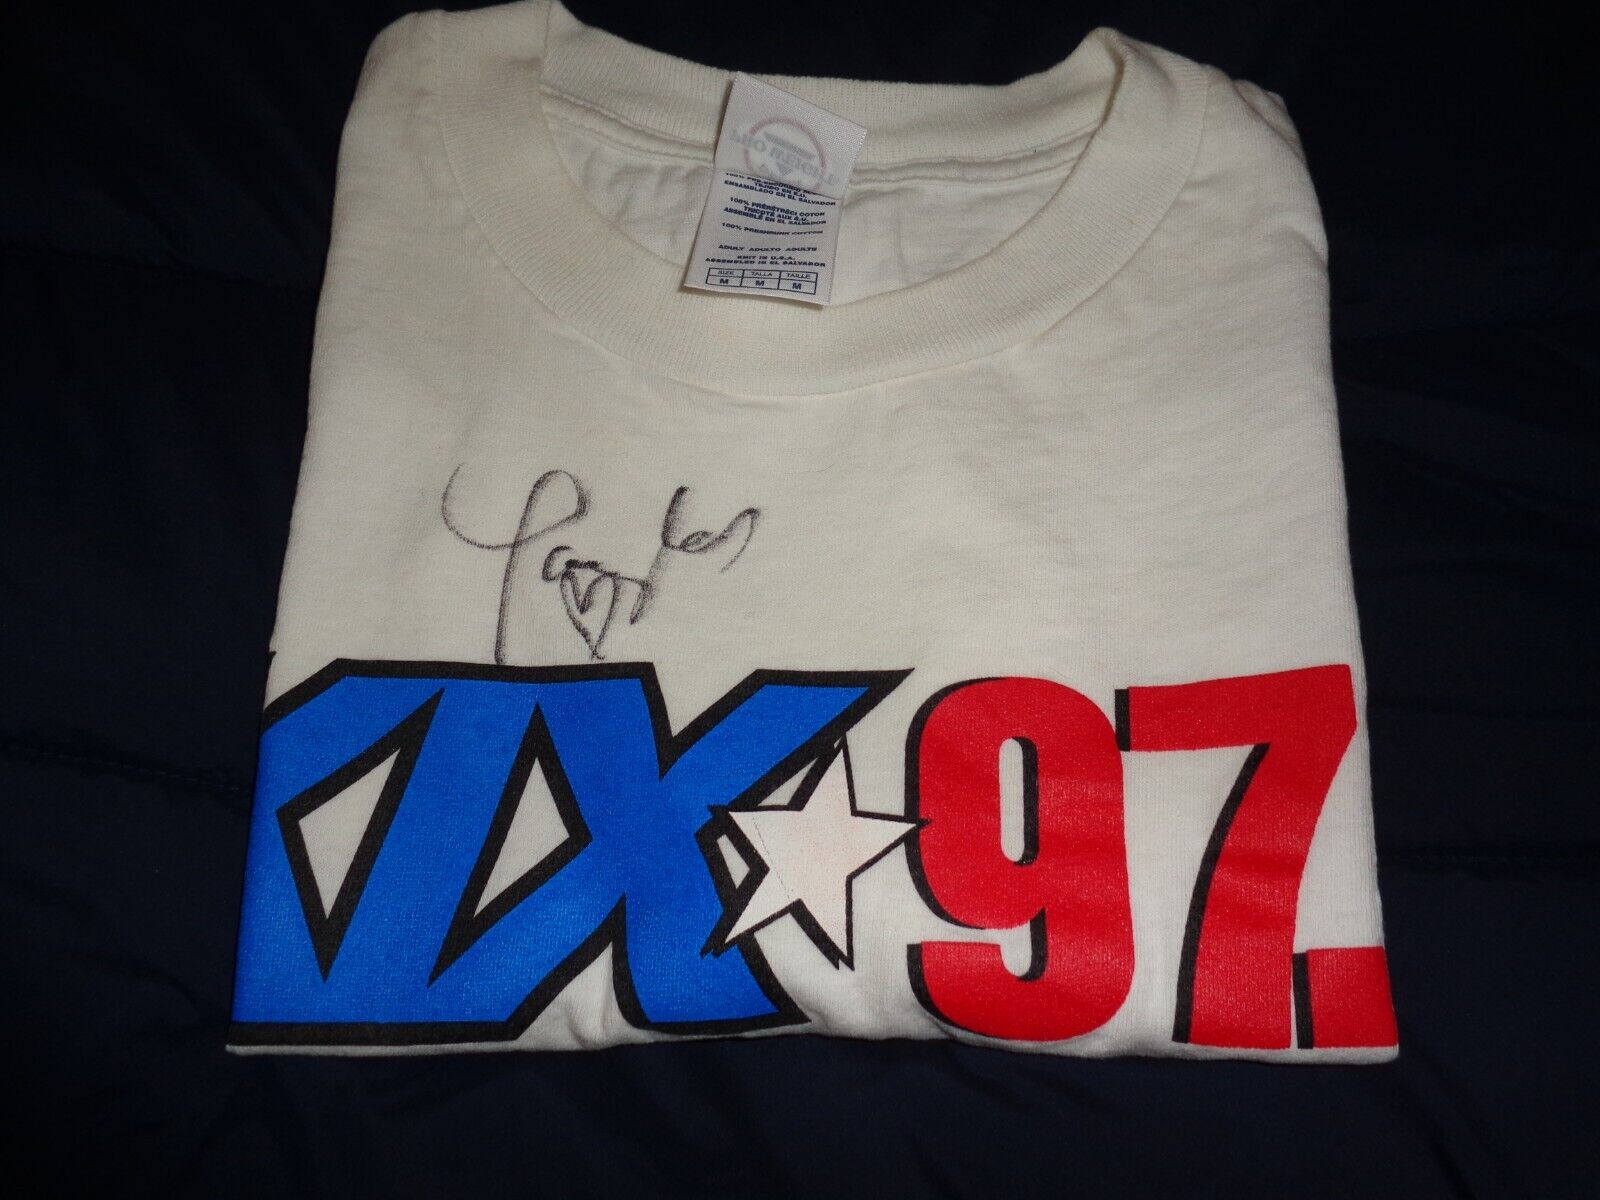 TAYLOR SWIFT Signed KIX 97.9 T SHIRT with PSA/DNA Letter of Authenticity